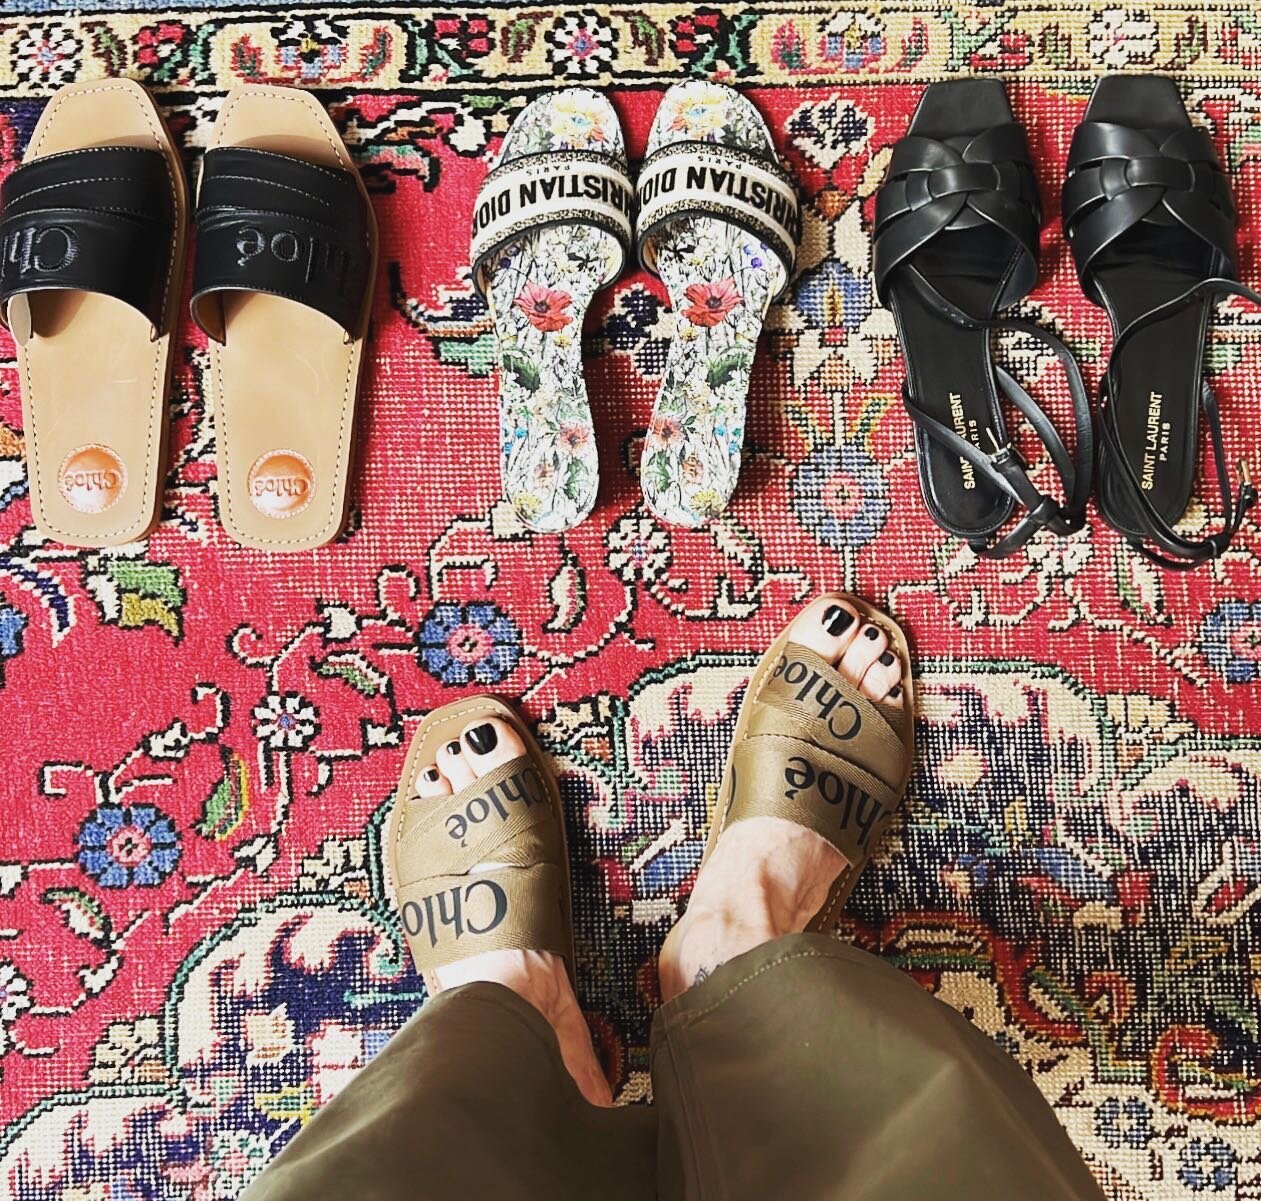 Packing for a trip to Charleston and trying to figure out which shoes to bring&hellip; maybe all of them?